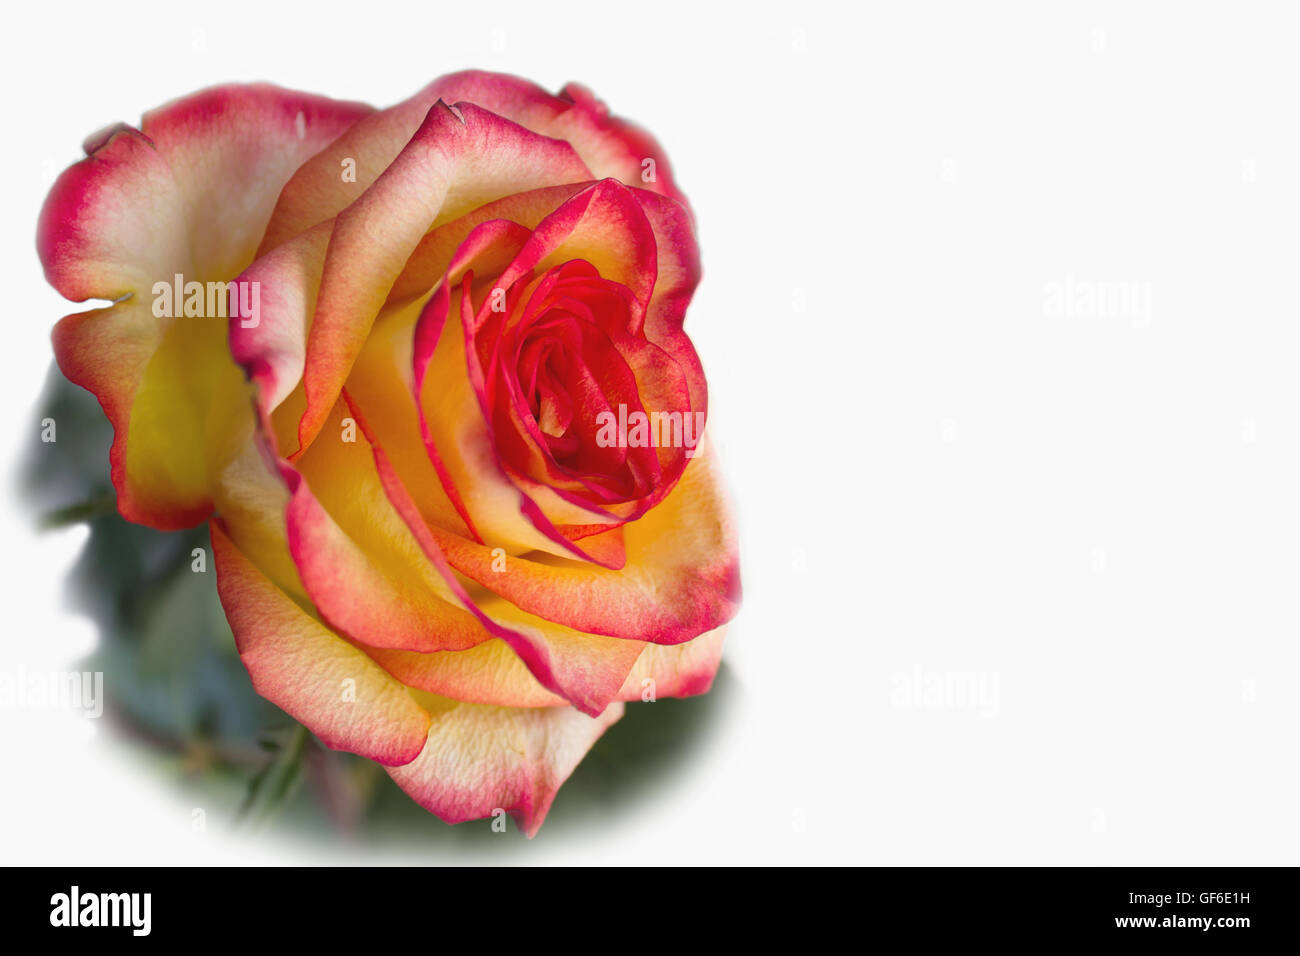 Close-up bud of the red with yellow rose Stock Photo